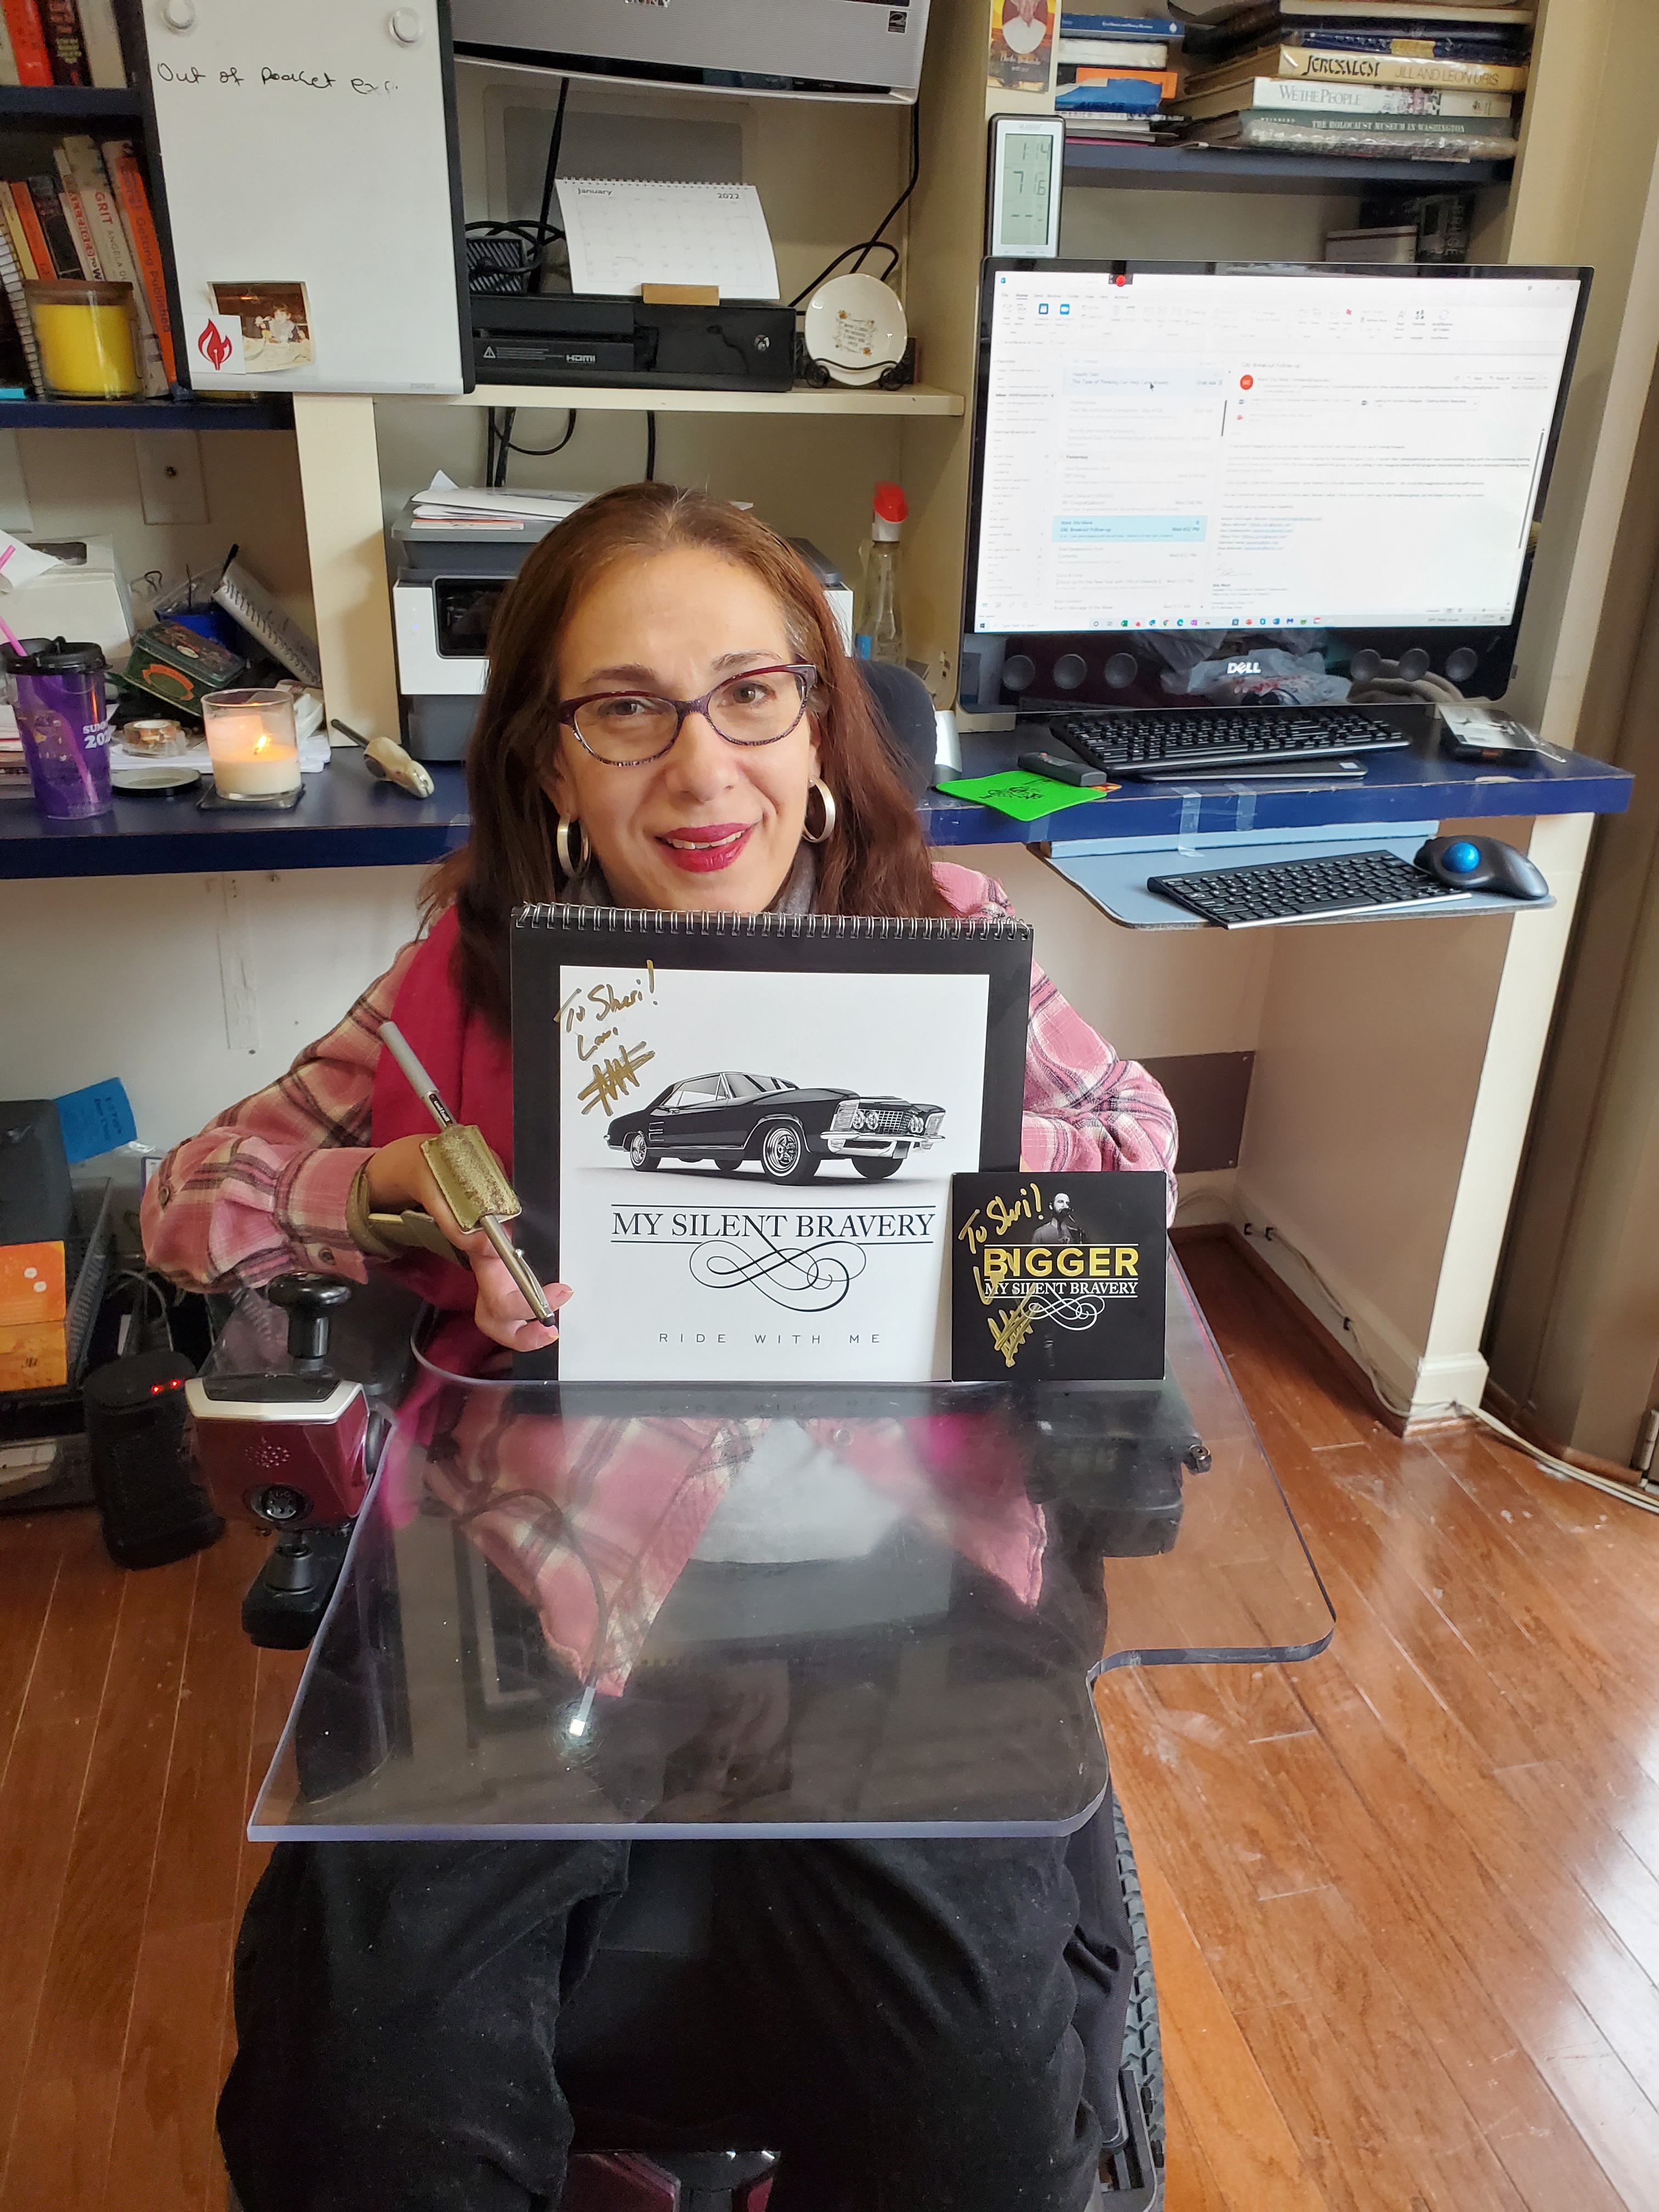 Sheri excited with her merch from one of her favorite artists, MySilentBravery.,1-22.